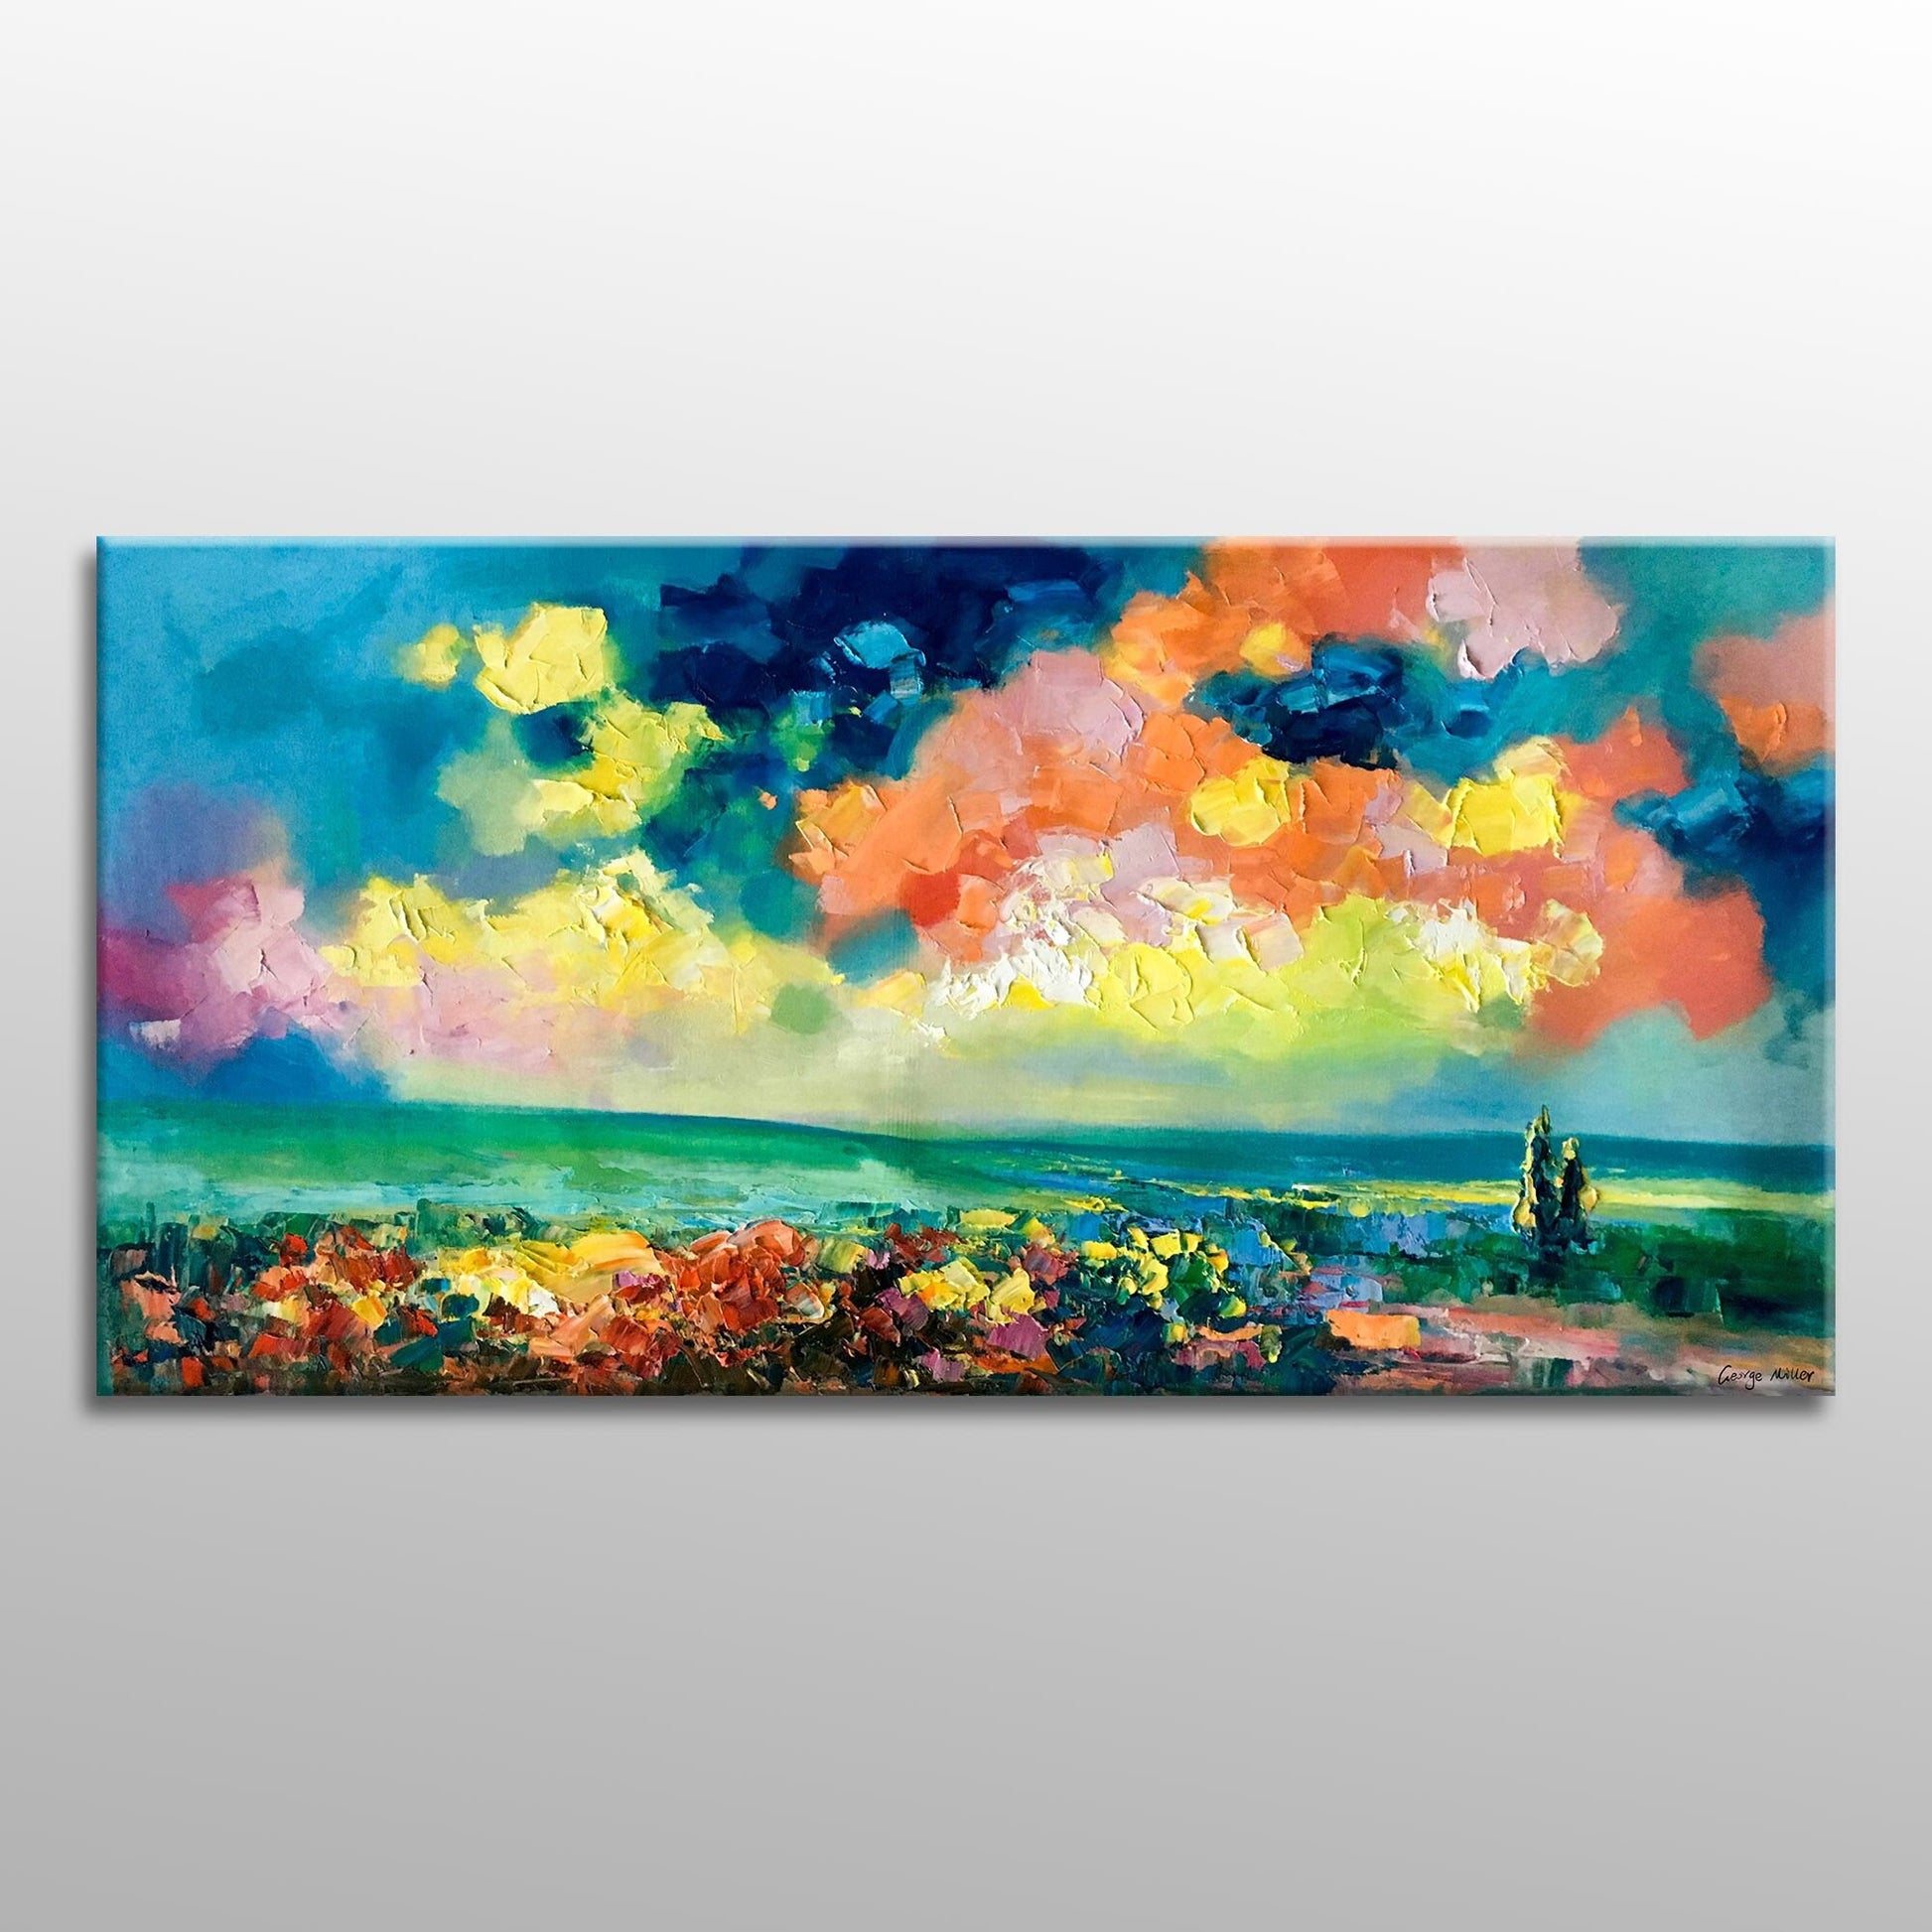 Abstract Painting Landscape, Wall Art Canvas, Original Oil Painting, Original Artwork, Decor Wall Art Original, Extra Large Painting